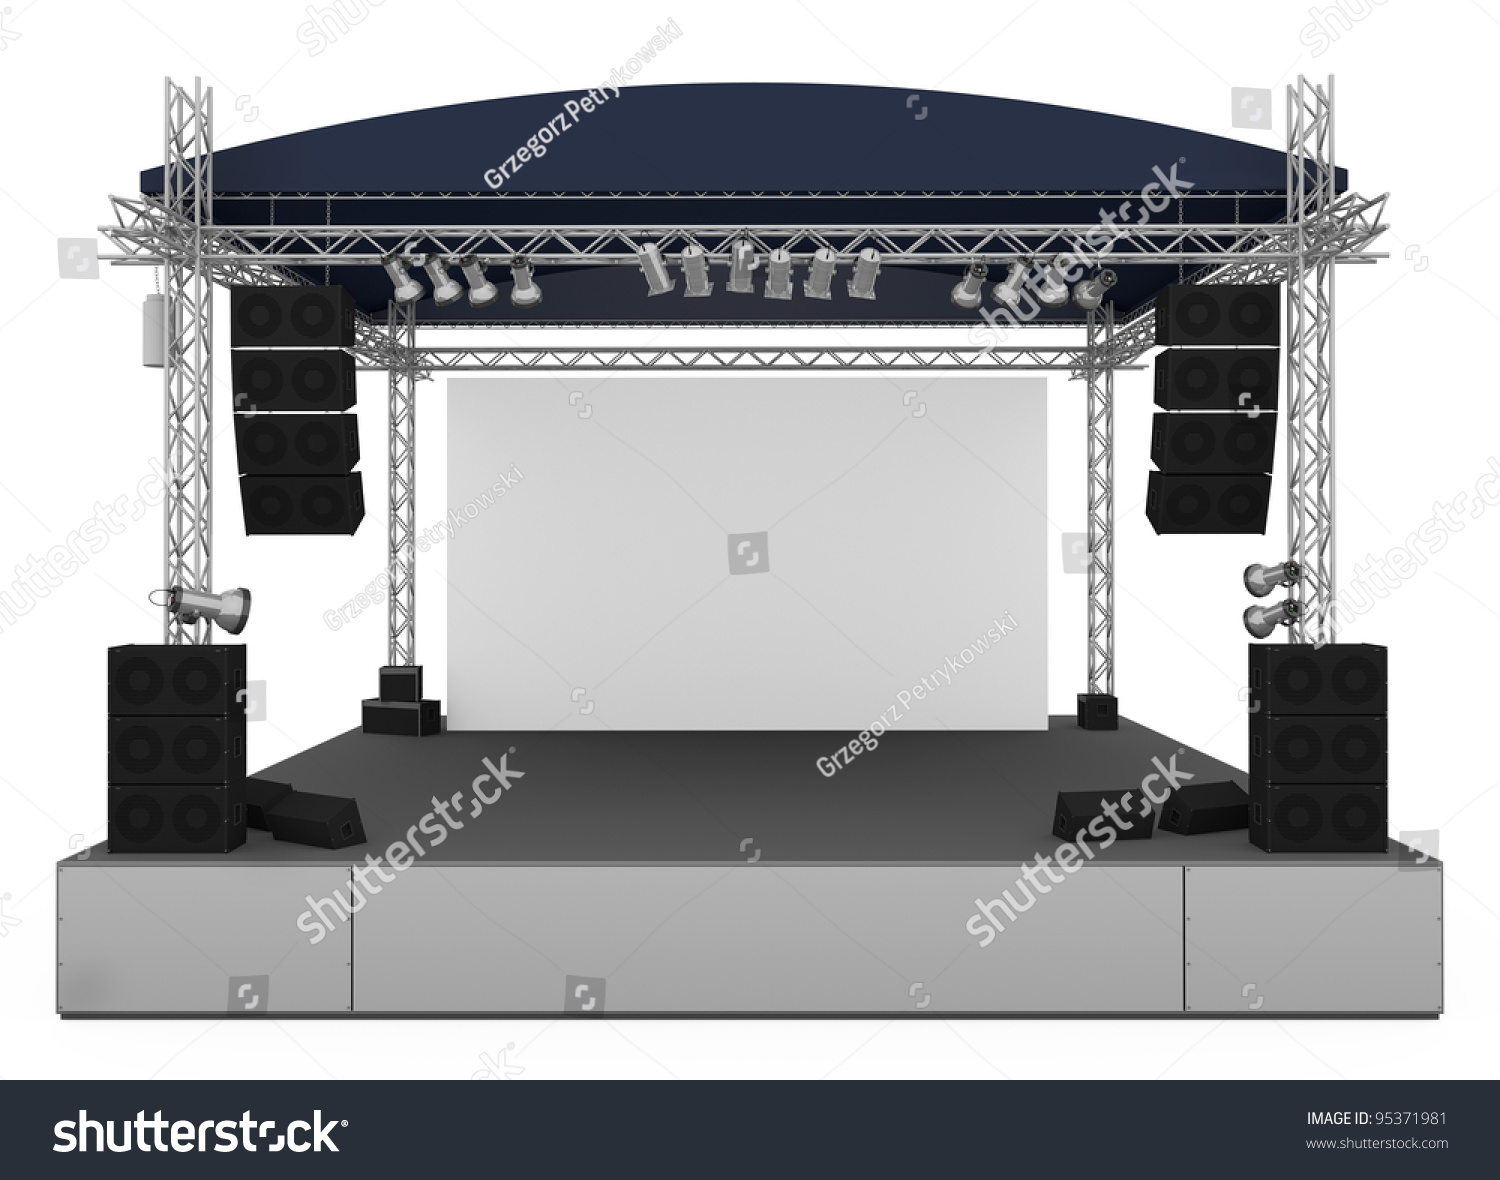 Front View Of Outdoor Gig Stage 3d Render Royalty Free Stock Photo 95371981 Avopix Com